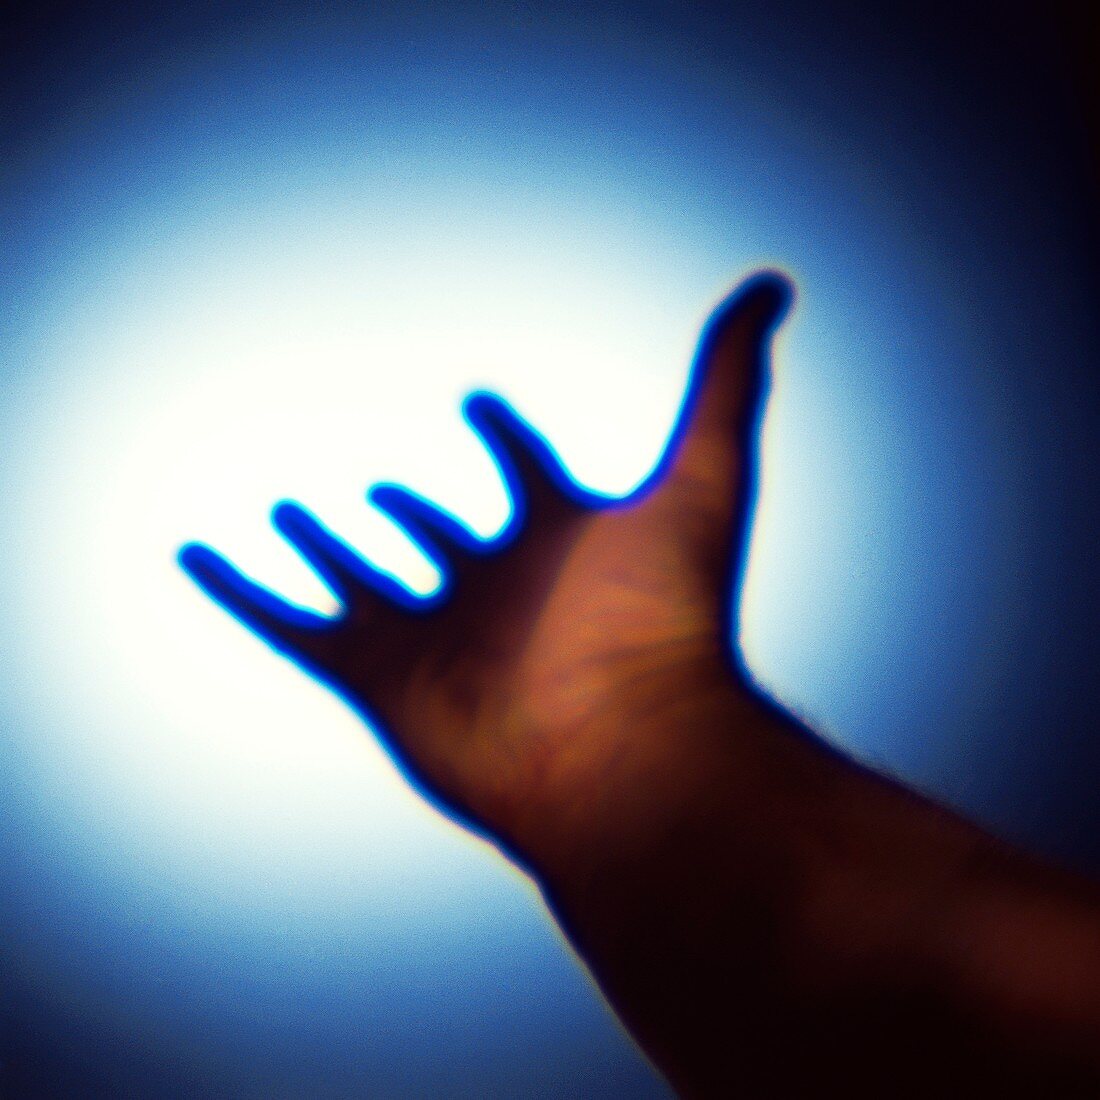 Reaching out,conceptual image